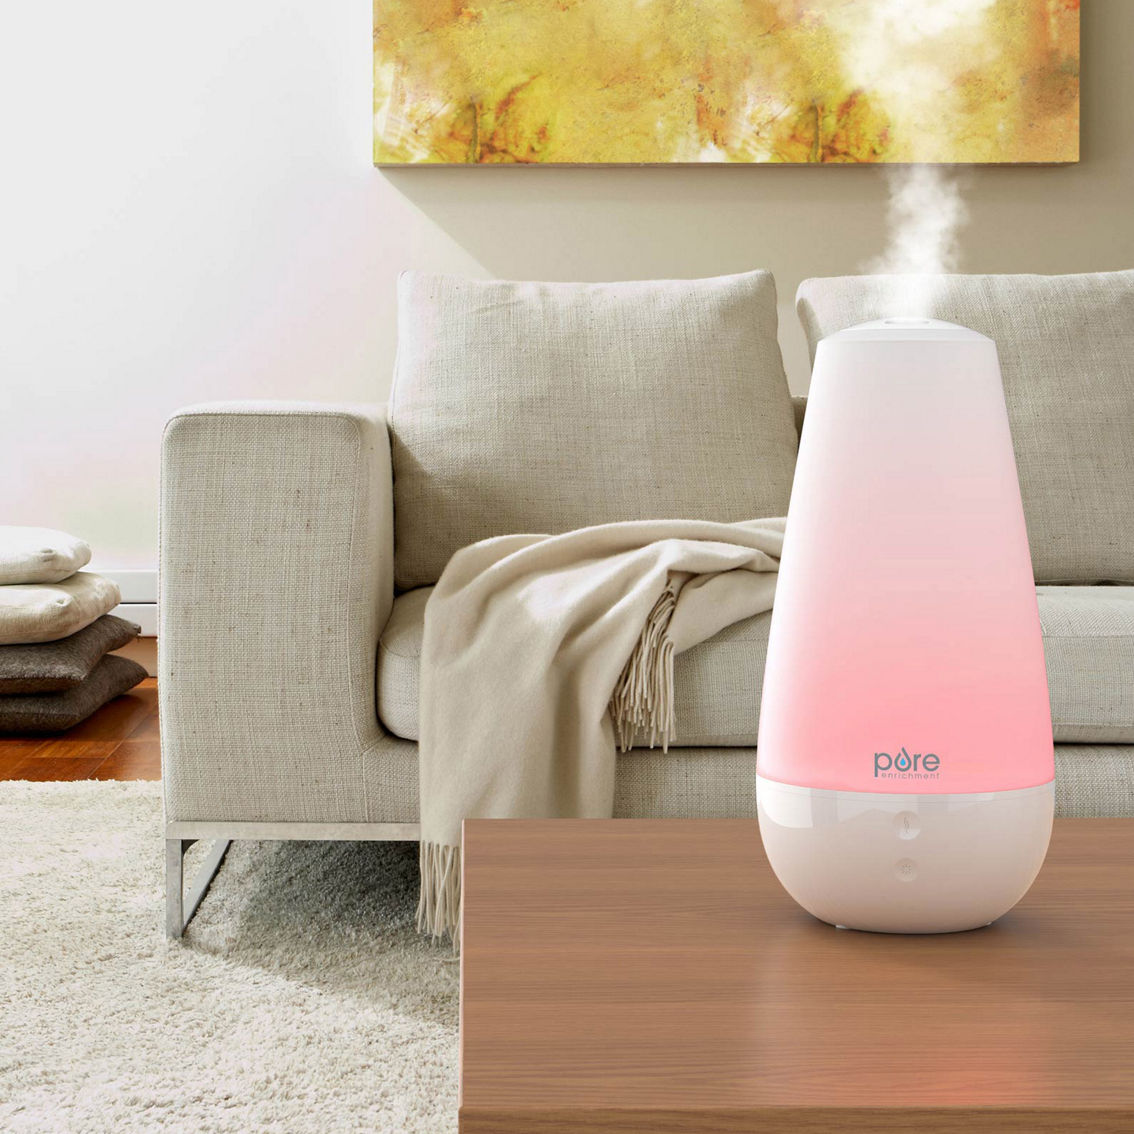 Pure Enrichment PureSpa XL 3-In-1 Aroma Diffuser Humidifier and Mood Light - Image 2 of 6